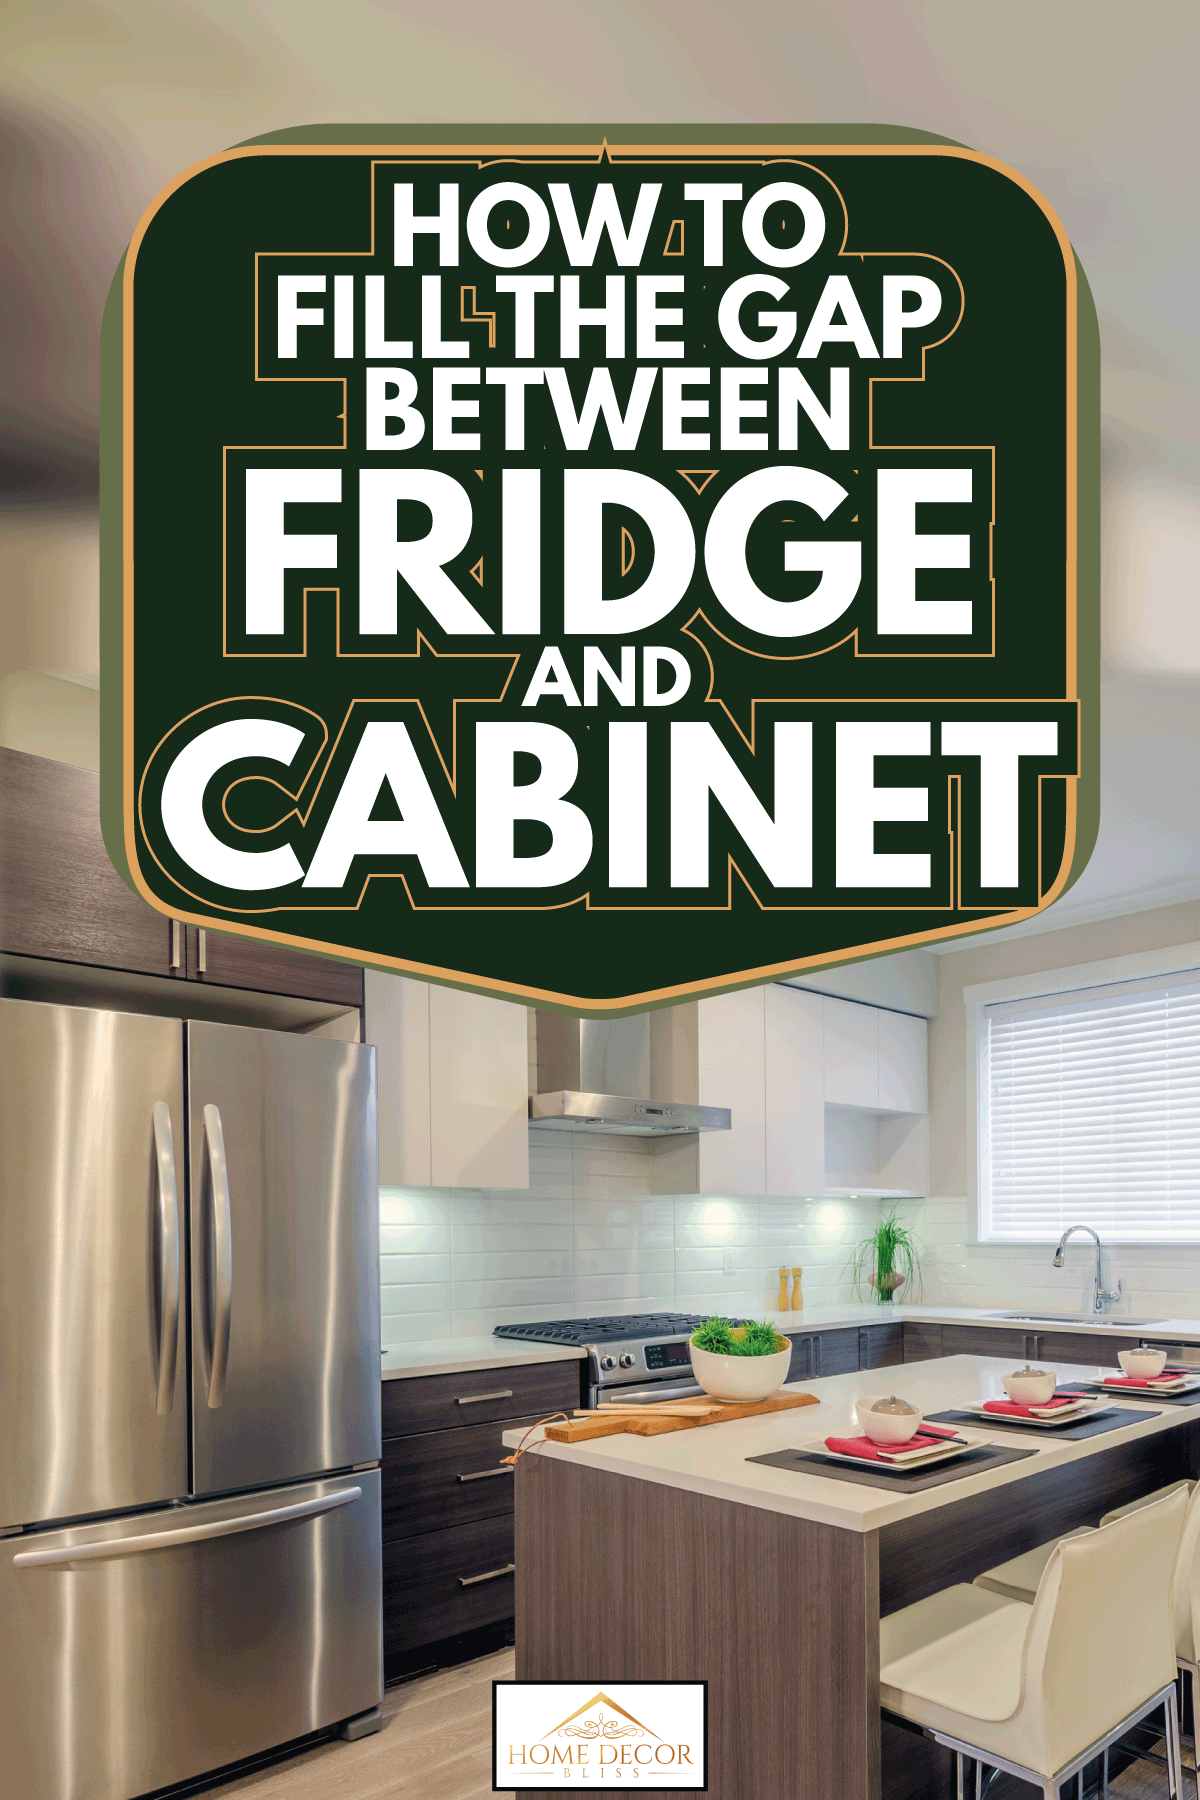 Paving One hundred years Hoist How To Fill The Gap Between Fridge And Cabinet - Home Decor Bliss